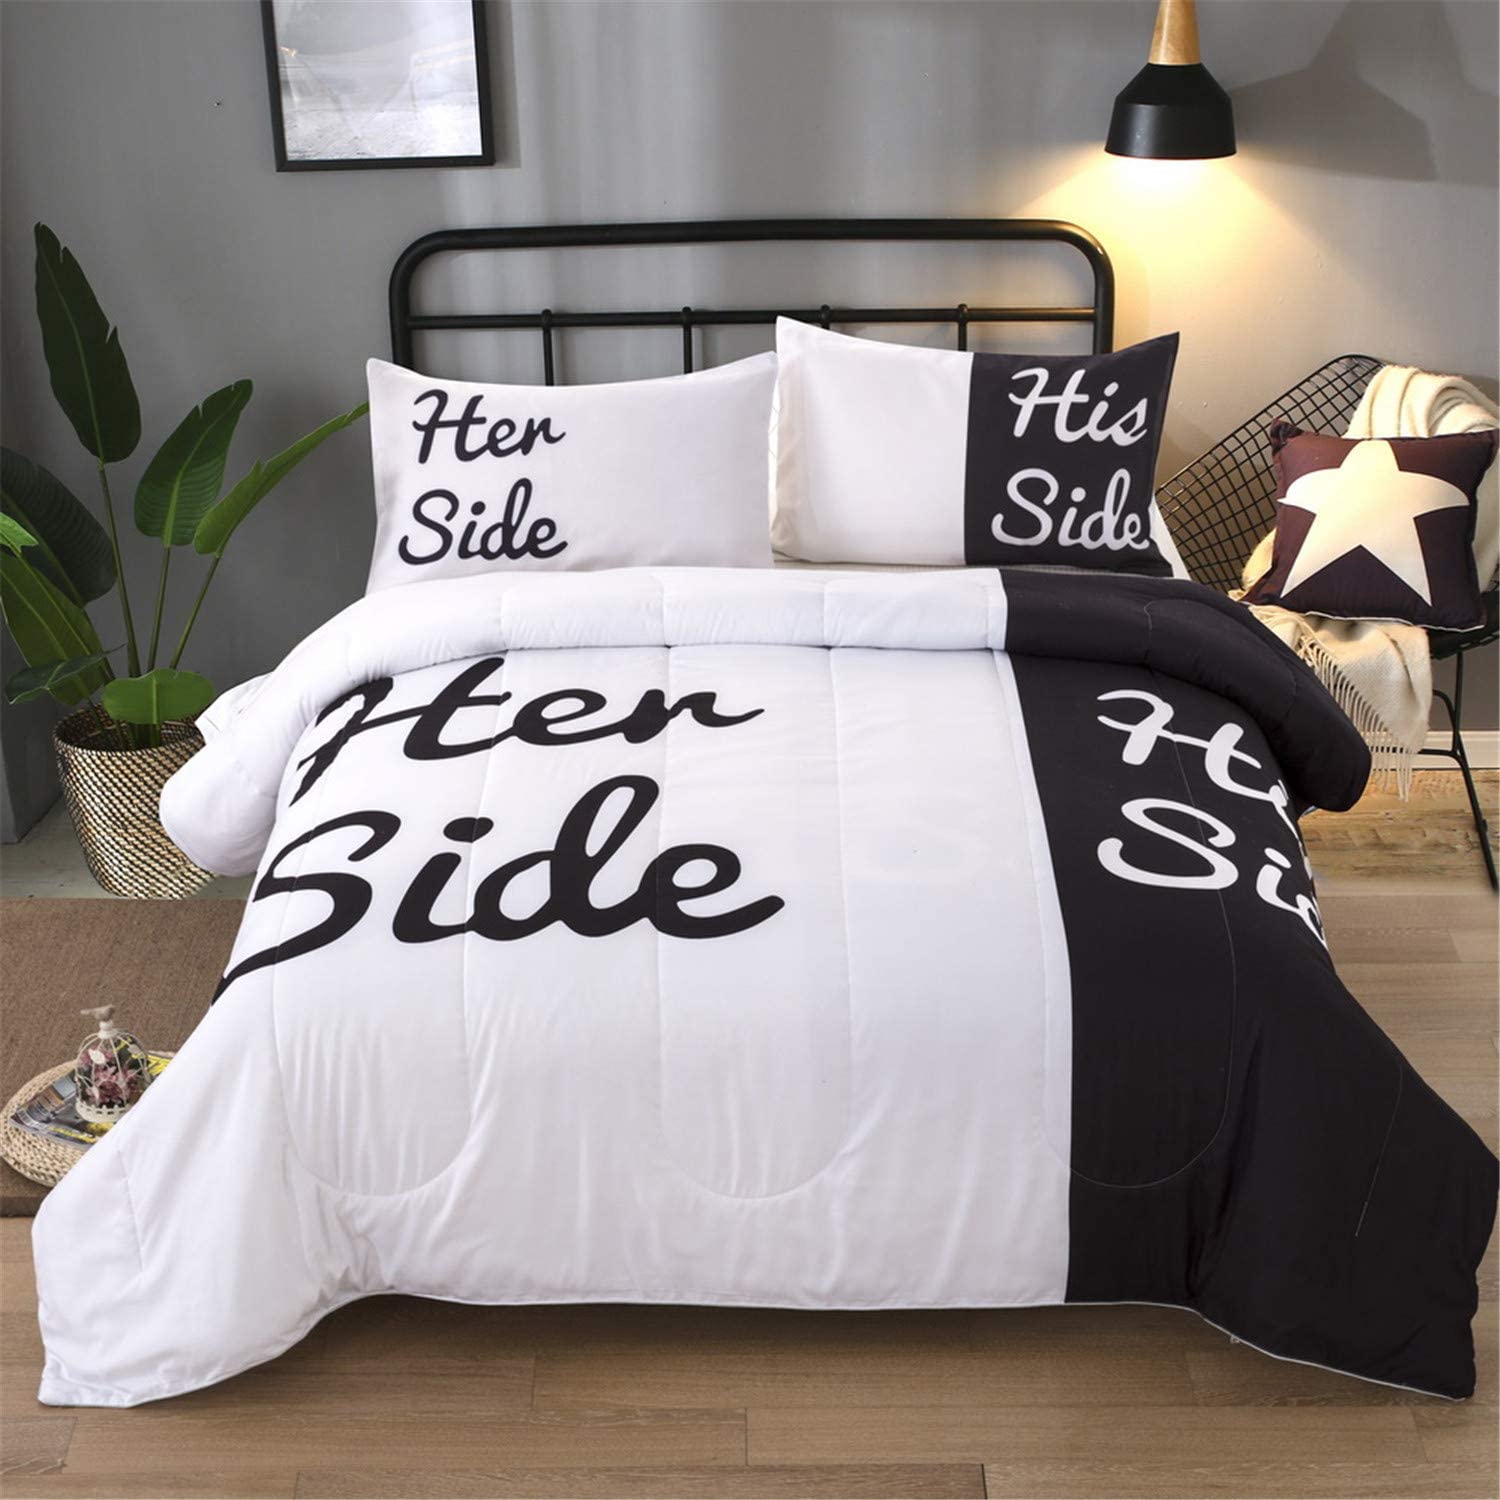 herhaling Tante Verplicht Black White Comforter Set King Her Side and His Side Printed Bedding Solid  Coupl | eBay